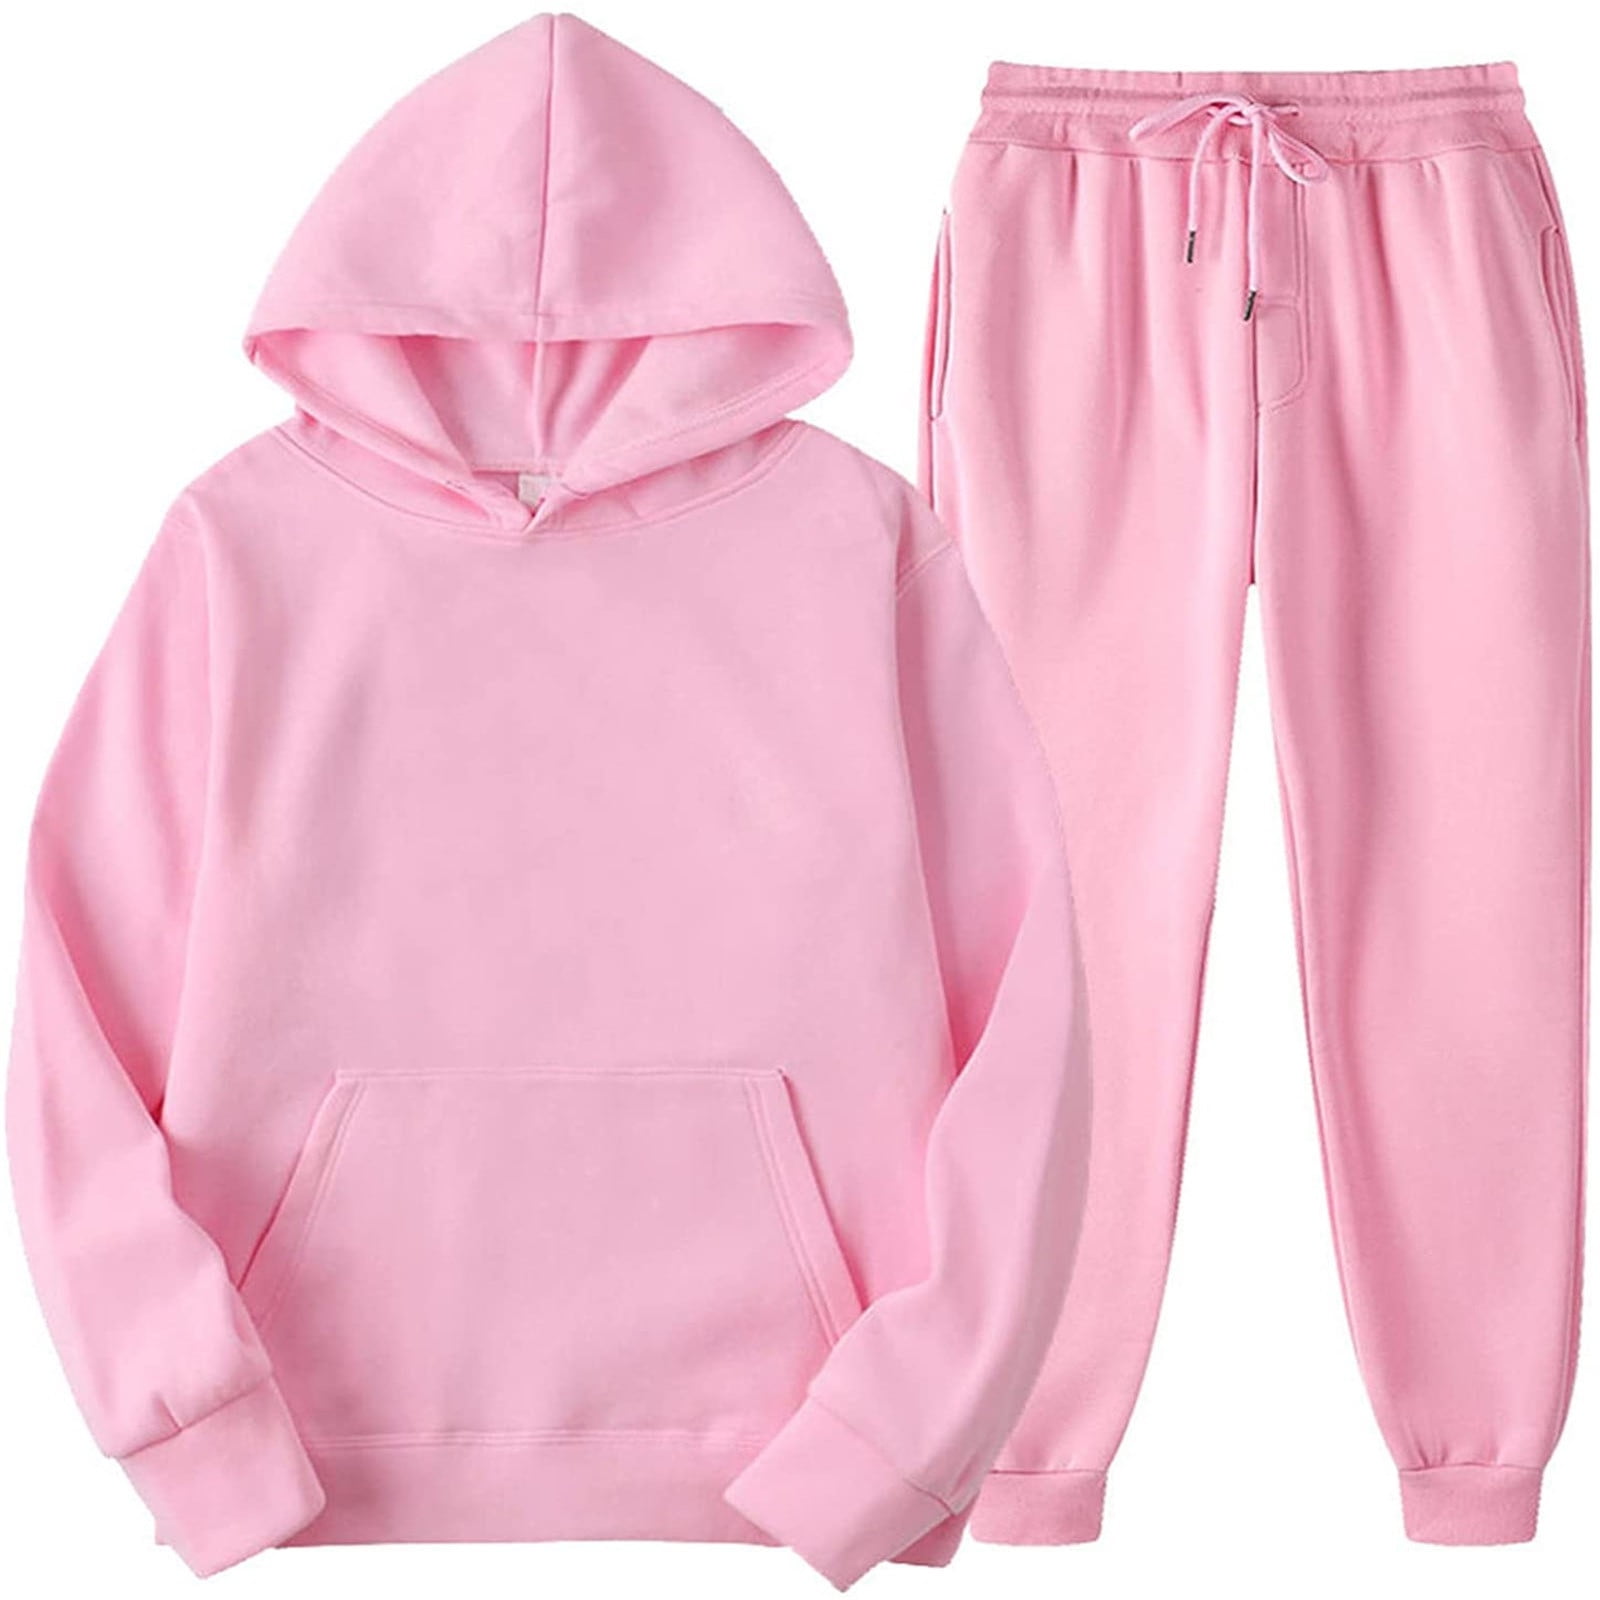 Reduced RQYYD Tracksuits 2Pcs Sets Womens Hoodies Joggers Teen Girls Hooded  Matching Joggers Pants Suit Sweatshirt and Sweatpants with Pockets